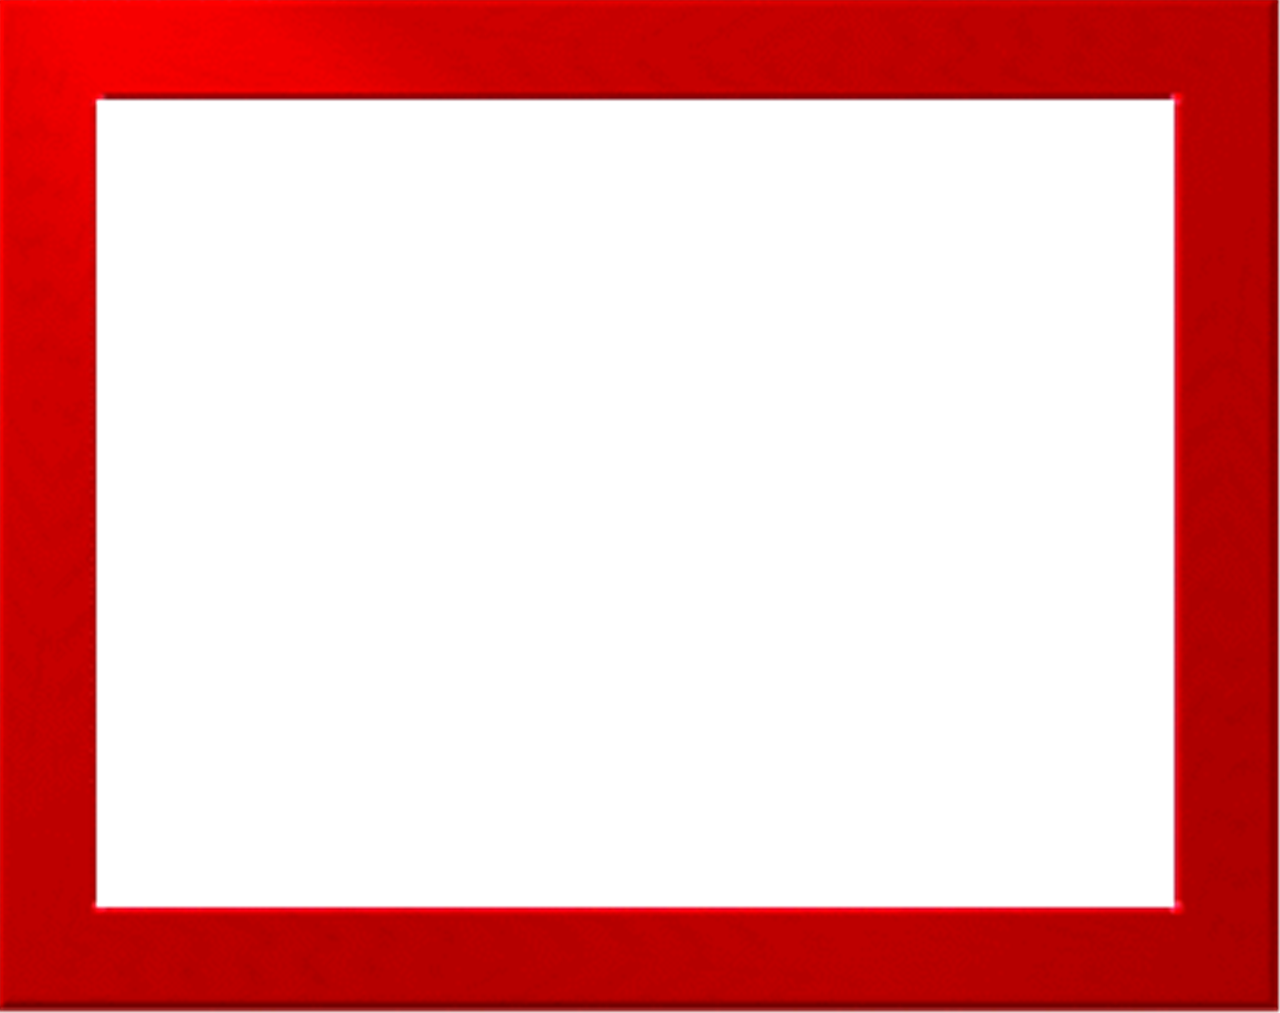 download red border frame png free download red square frame png png image with no background pngkey com download red border frame png free